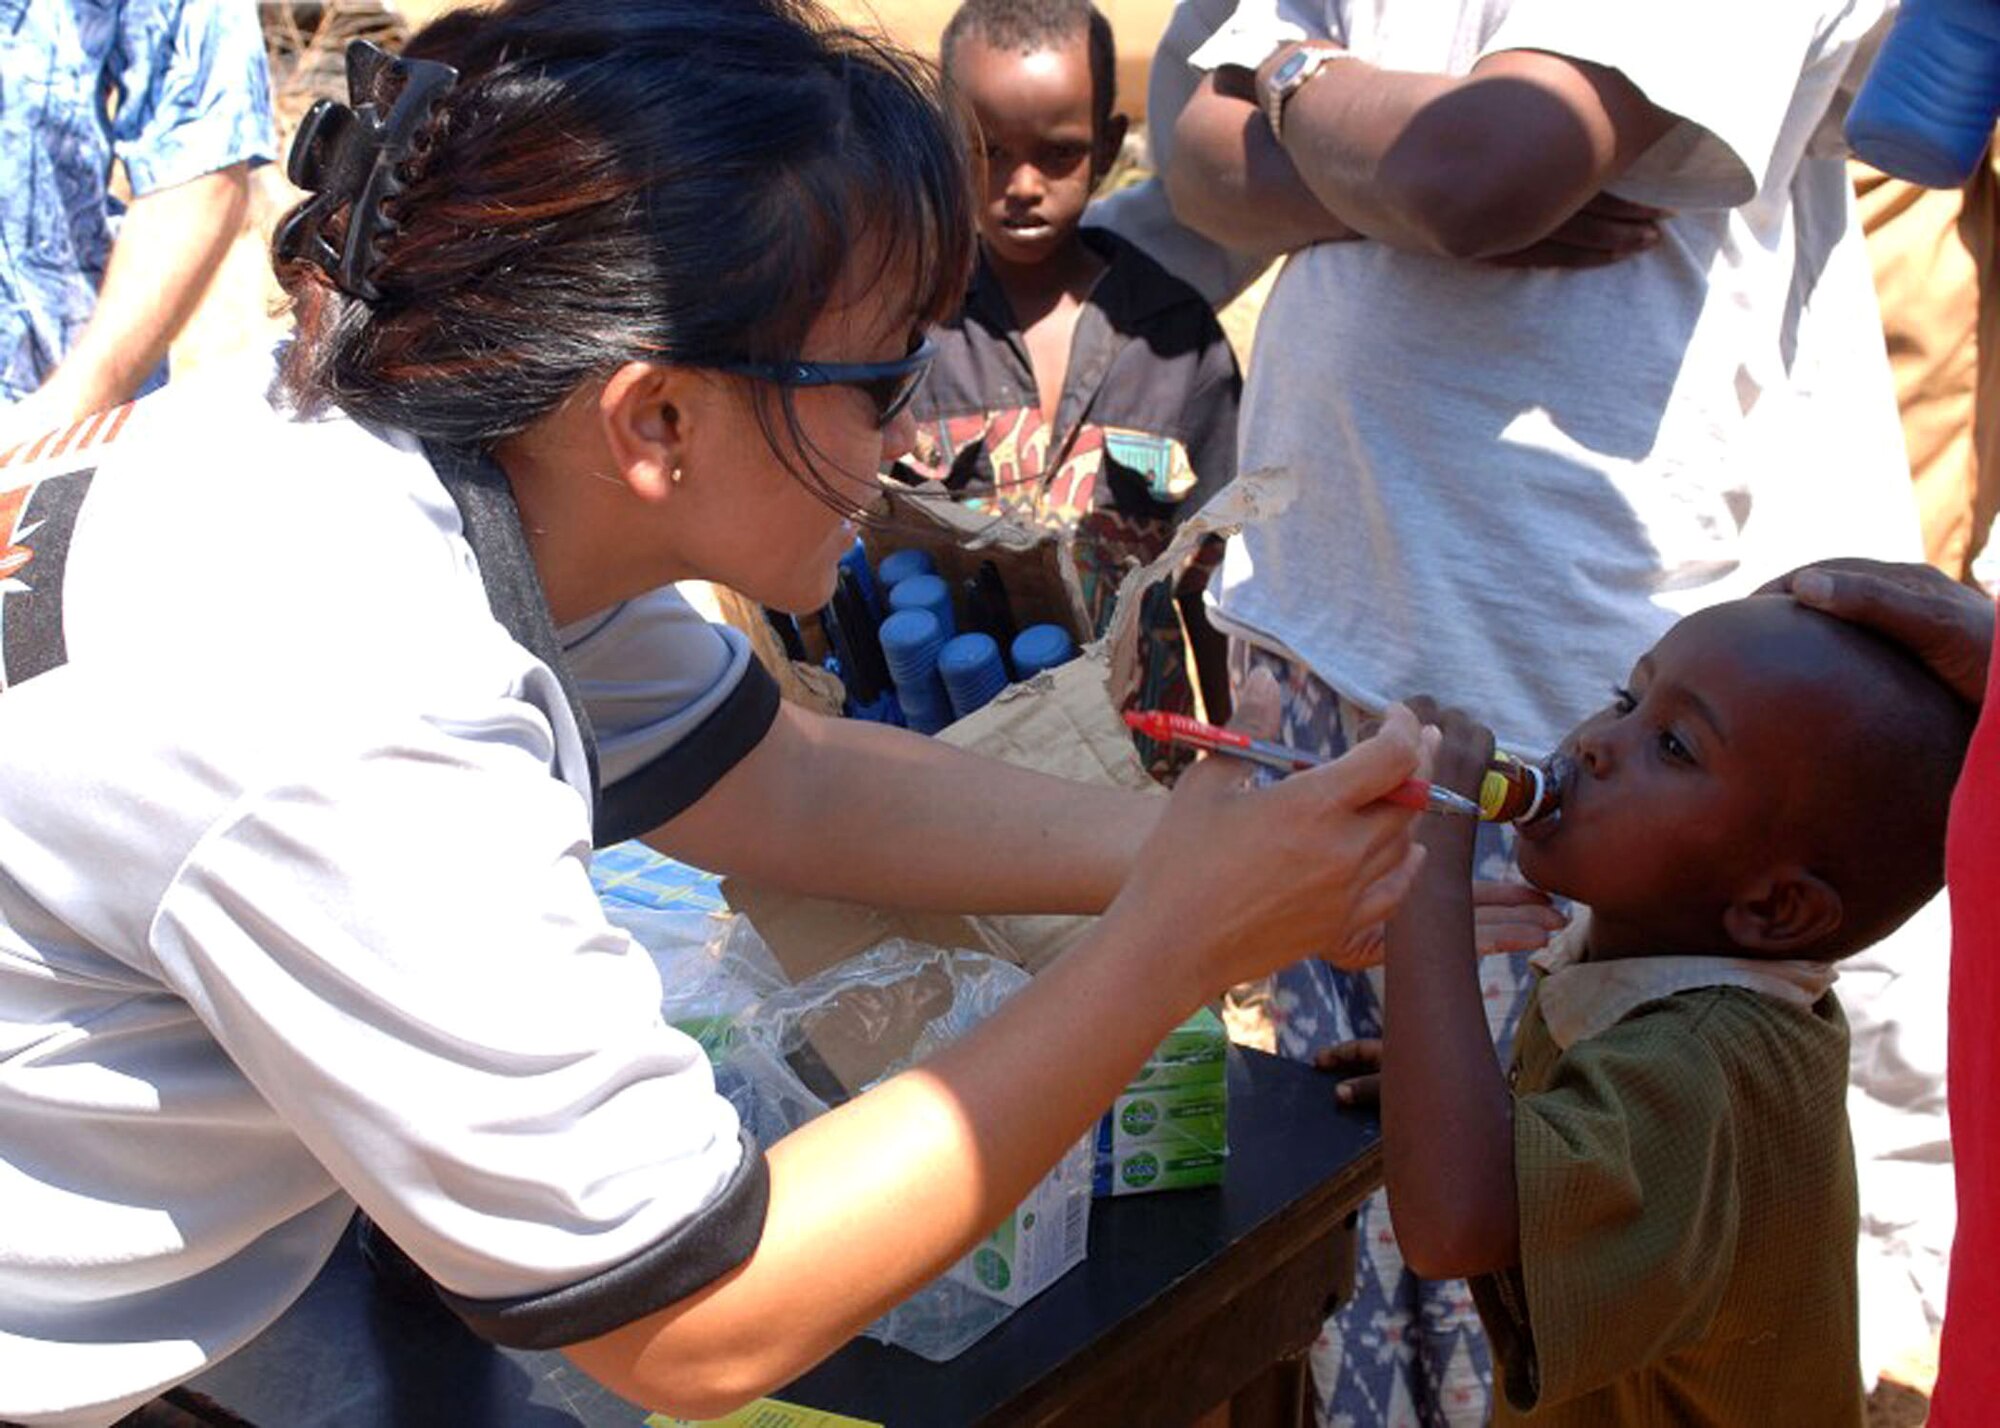 Maj. Pauline Lucas gives a child de-wormer medication during a Combined Joint Task Force - Horn of Africa Medical Civic Action Program in May in Kenya. CJTF-HOA servicemembers conducted the MEDCAP in the villages of Shimbir and Balich through a partnership with the Kenyan department of defense, which provided additional medical providers and logistical support. More than 1,000 people received healthcare as part of the project. Major Lucas is a CJTF-HOA public health officer. (U.S. Air Force photo/Tech. Sgt. Carrie Bernard) 
